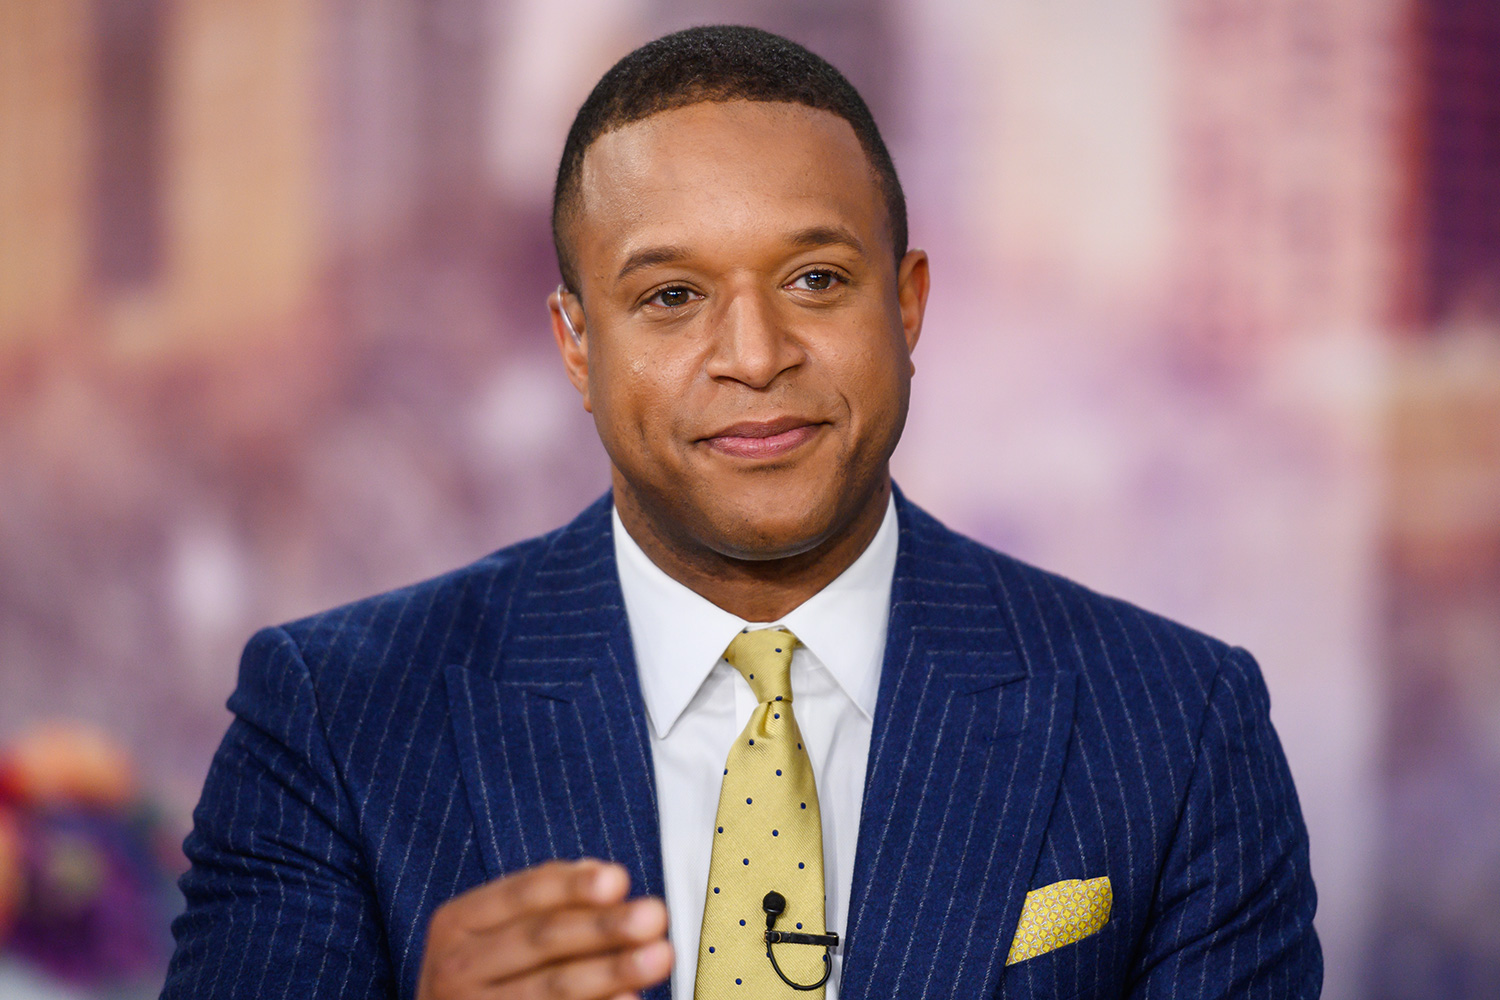 What is Craig Melvin salary?